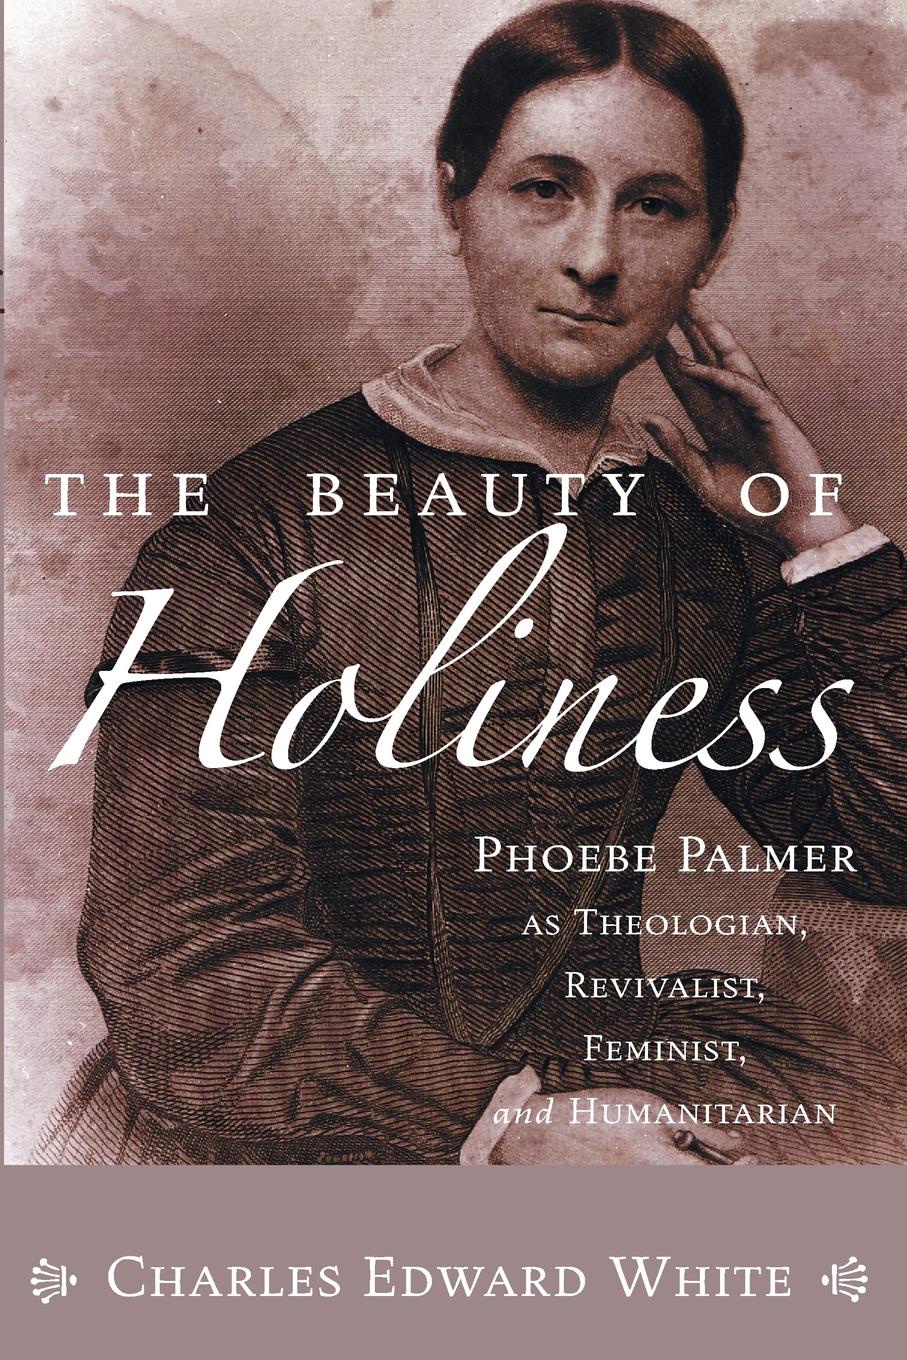 The Beauty of Holiness. Phoebe Palmer as Theologian, Revivalist, Feminist and Humanitarian